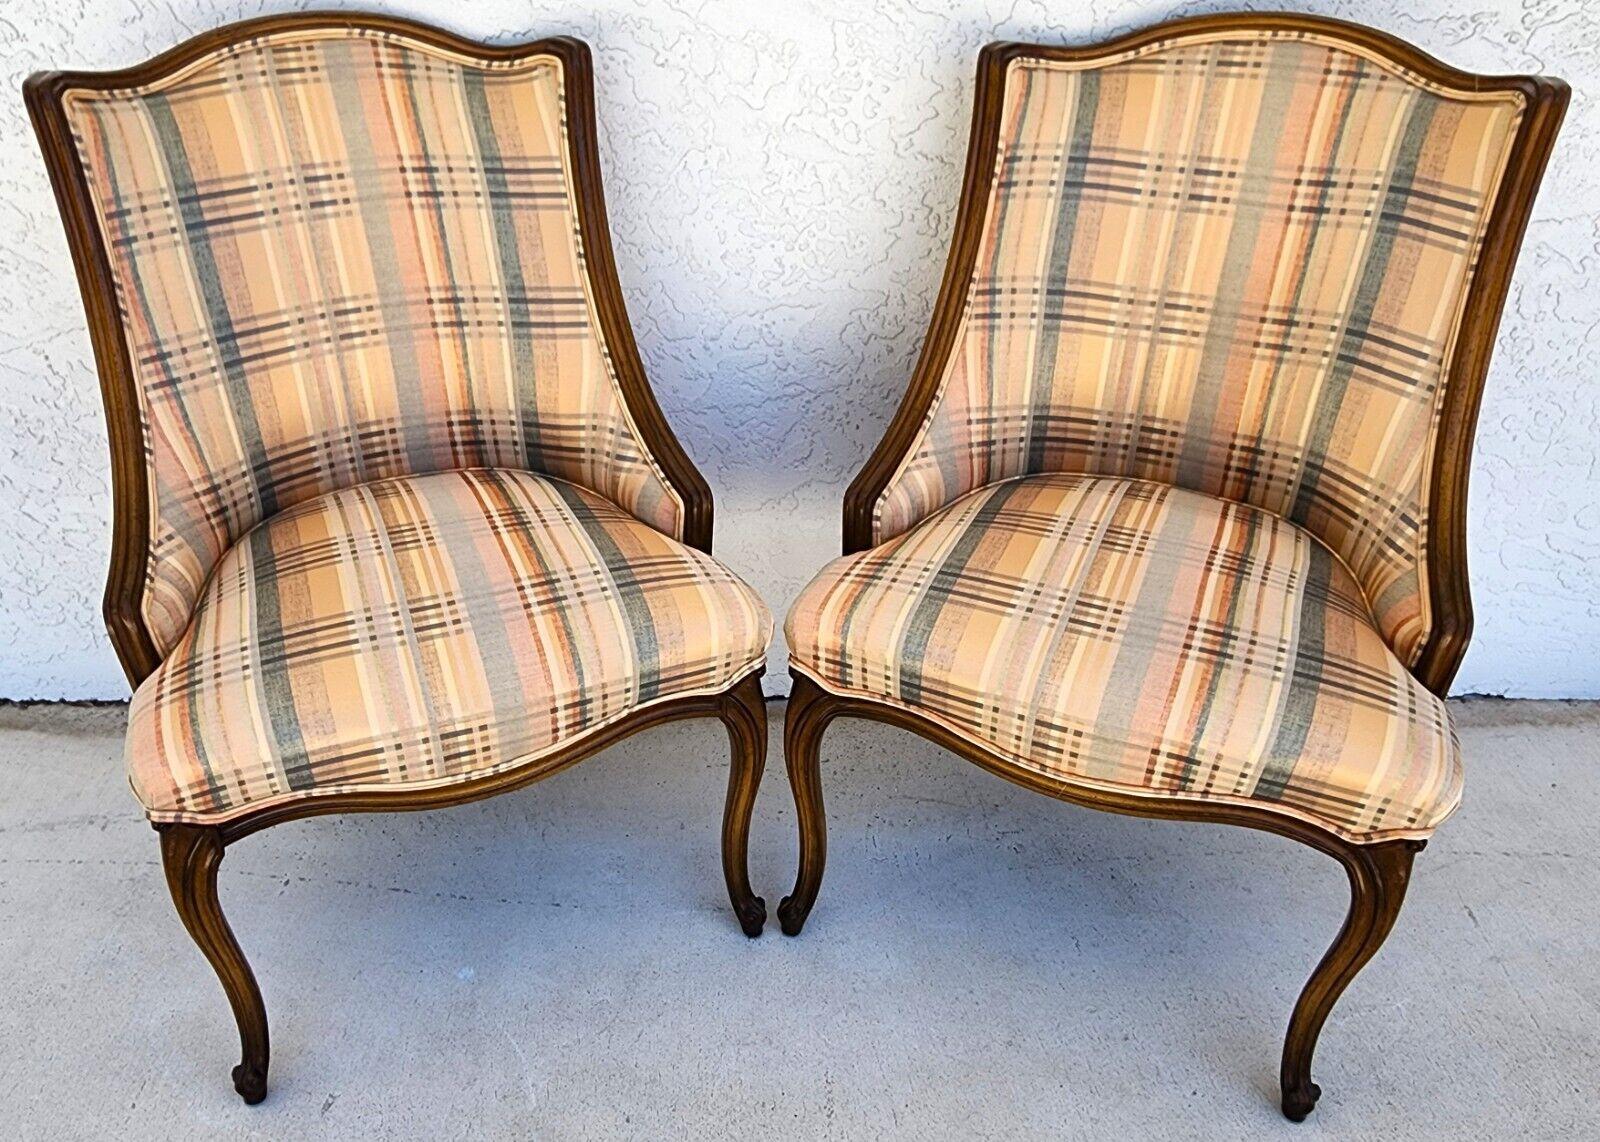 For FULL item description click on CONTINUE READING at the bottom of this page.

Offering One Of Our Recent Palm Beach Estate Fine Furniture Acquisitions Of A 
Set of 2 Ralph Lauren Style Fabric Country French Antique 1940s Accent Chairs
Very